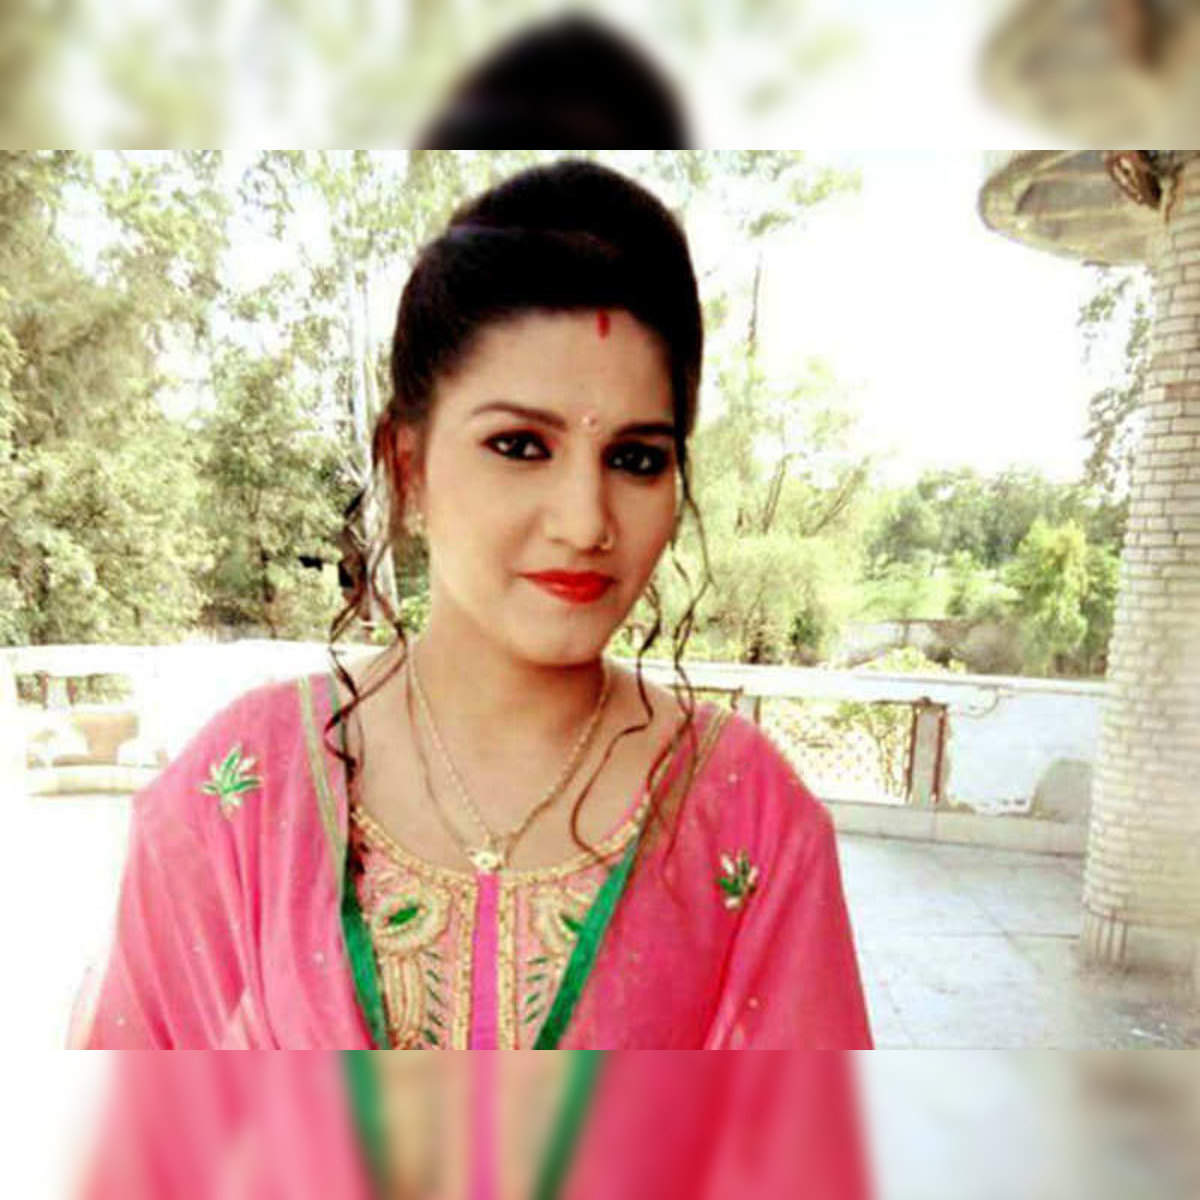 Haryanavi singer-dancer Sapna Chaudhary does volte-face, claims she hasn't  joined Congress - The Economic Times